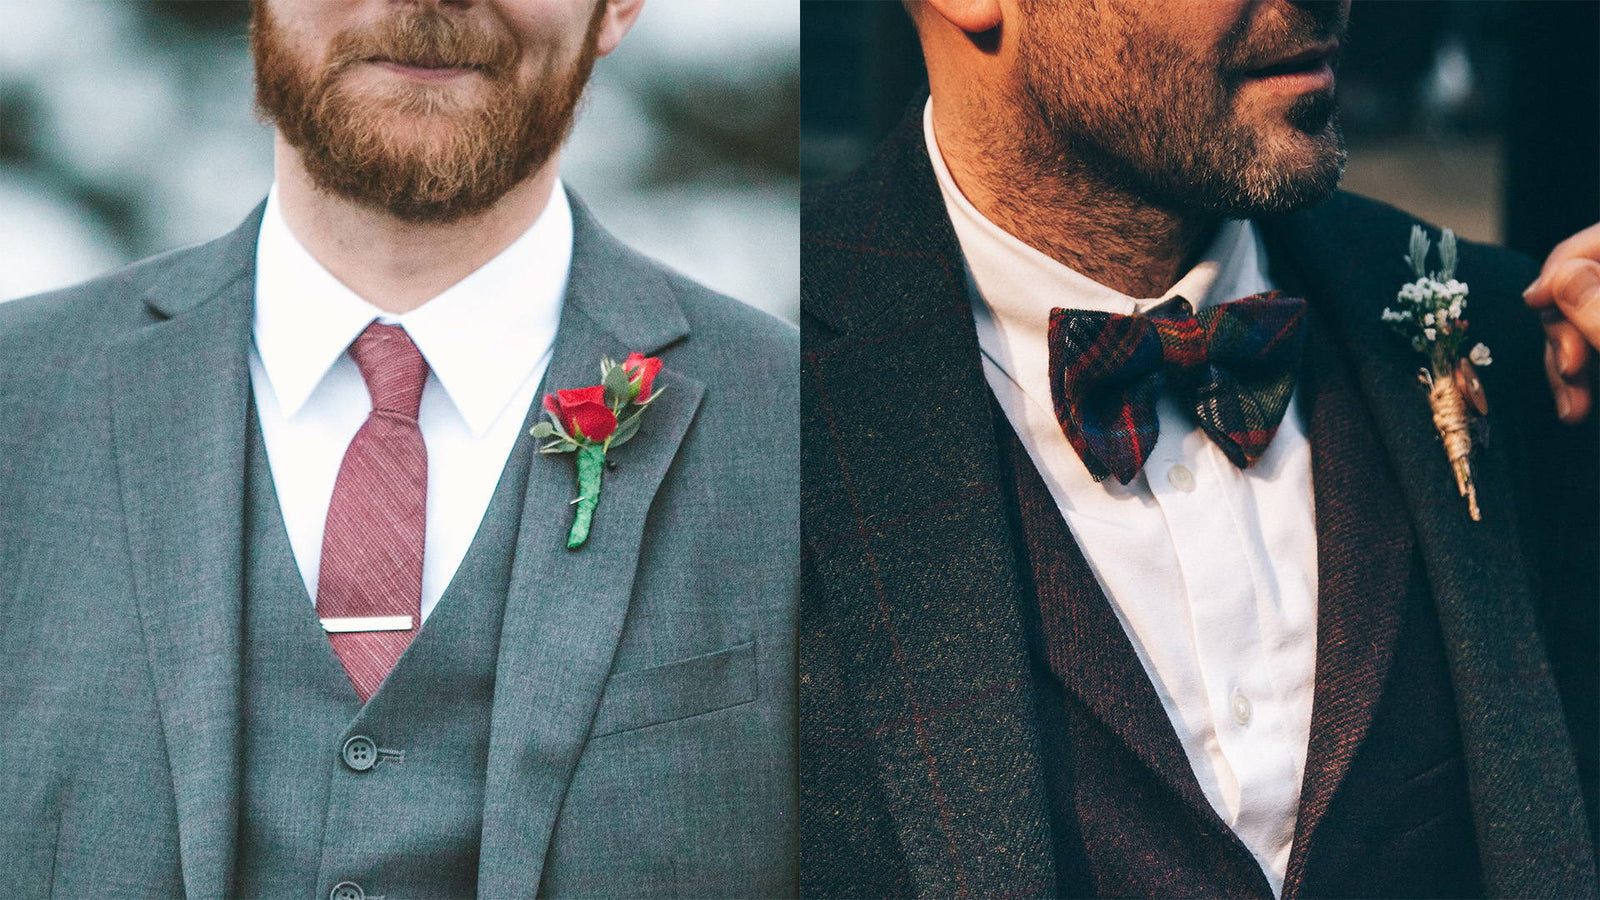 Types of Bow Tie Styles - Look Your Best for Any Occasion